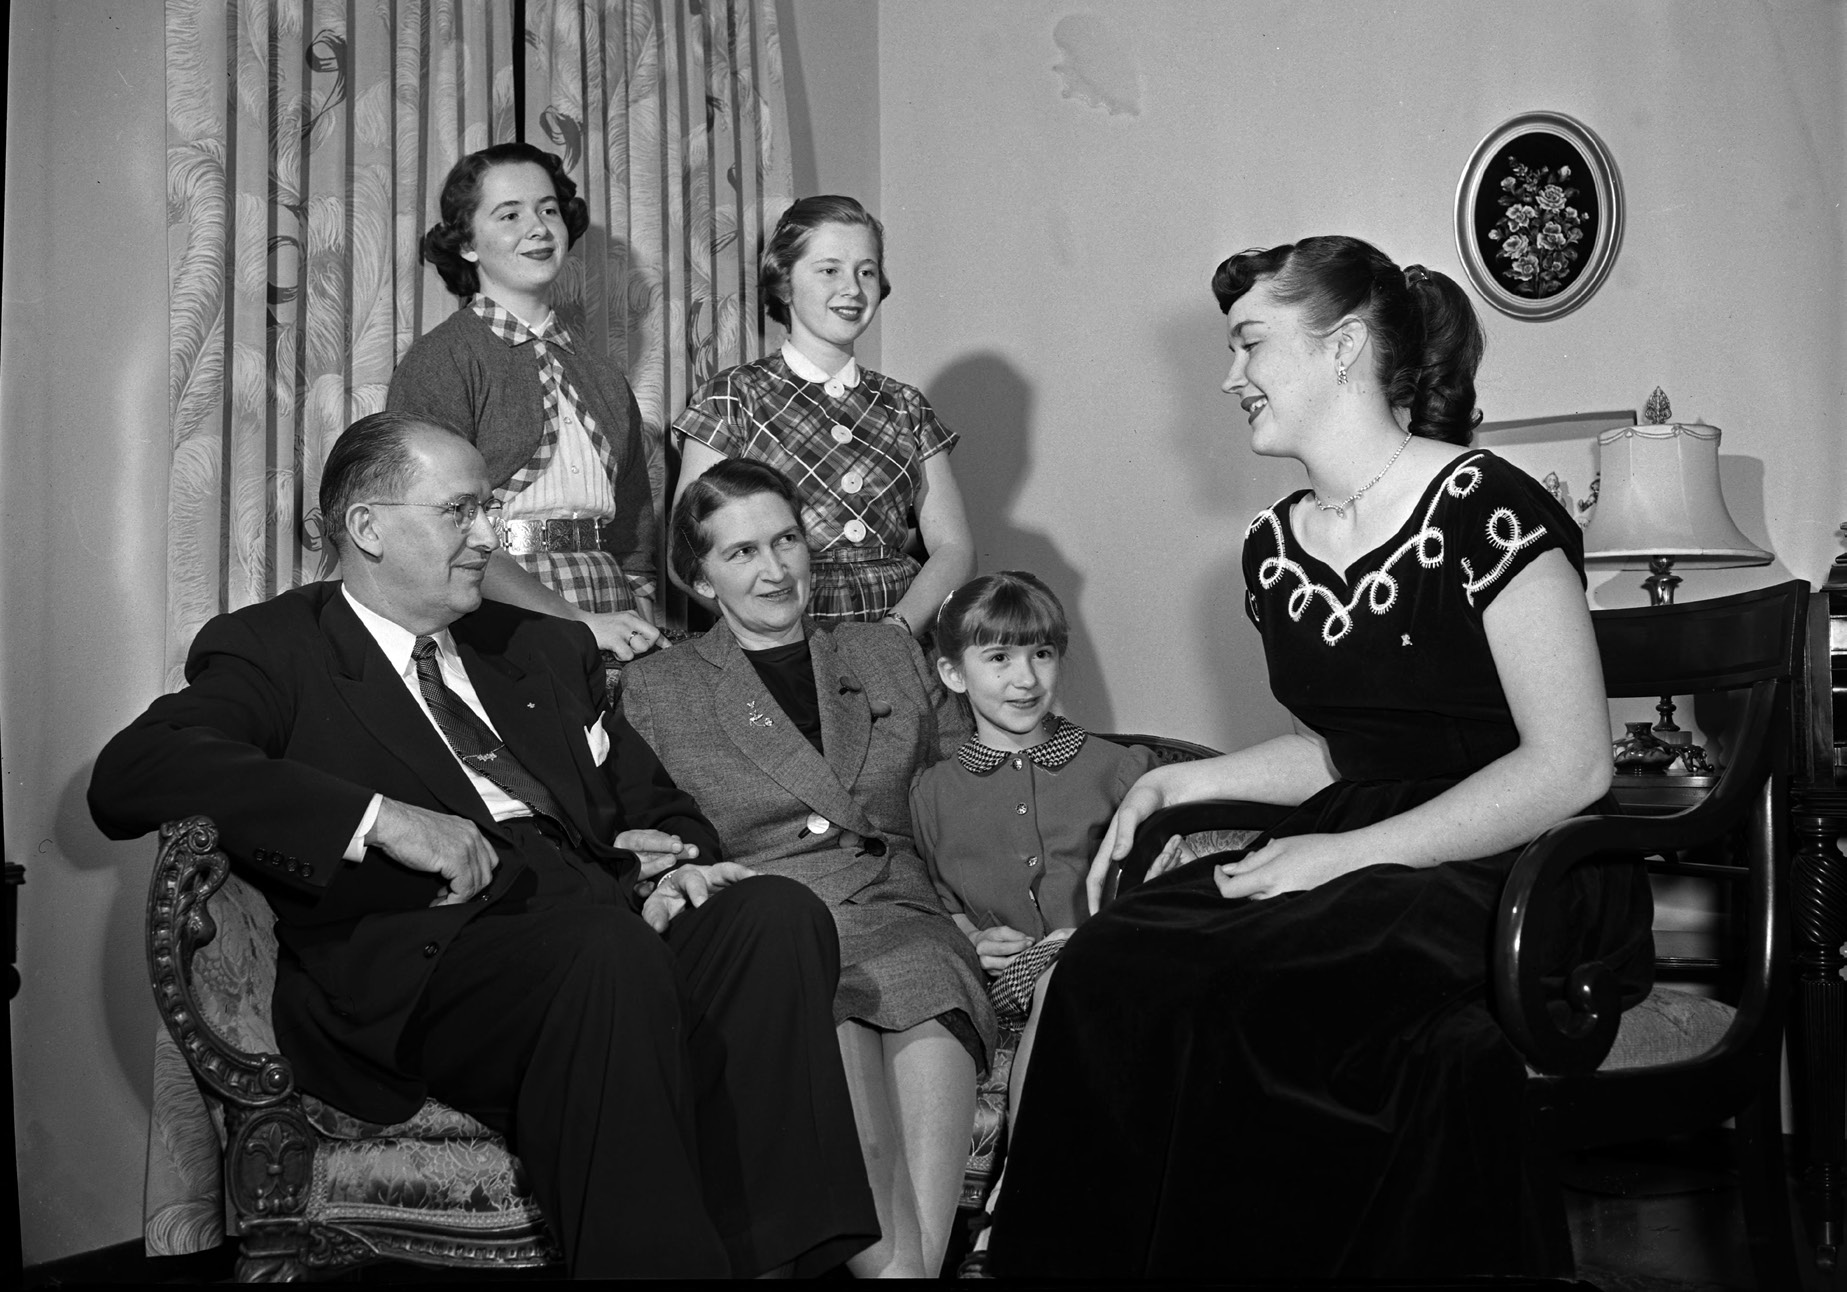 Newly appointed secretary of agriculture Ezra Taft Benson with his wife, Flora, and their four daughters, spending time together as a family, February 1953. Utah State Historical Society.